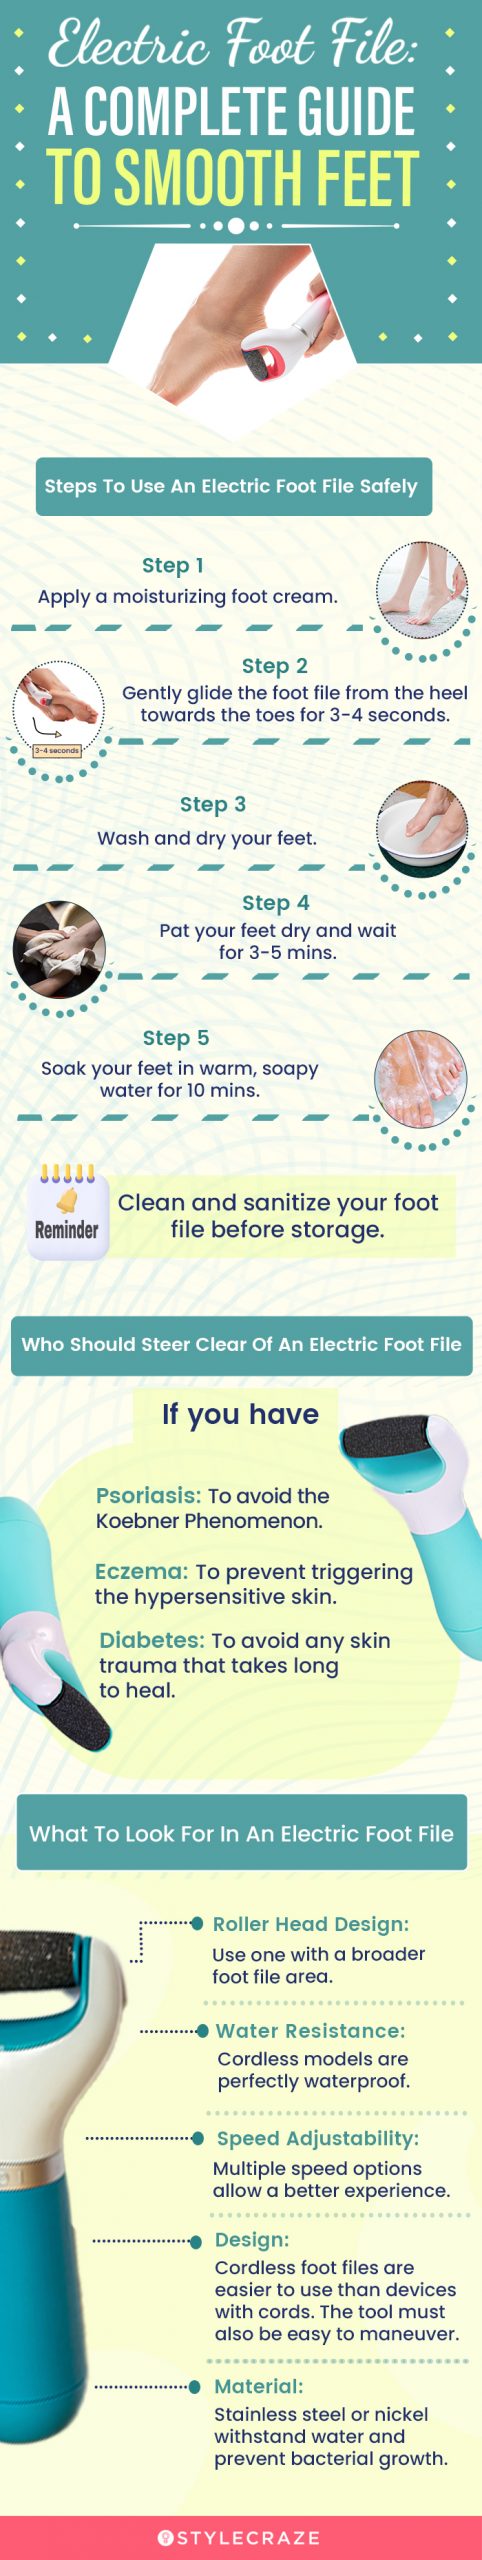 Electric Foot File: A Complete Guide To Smooth Feet [infographic]